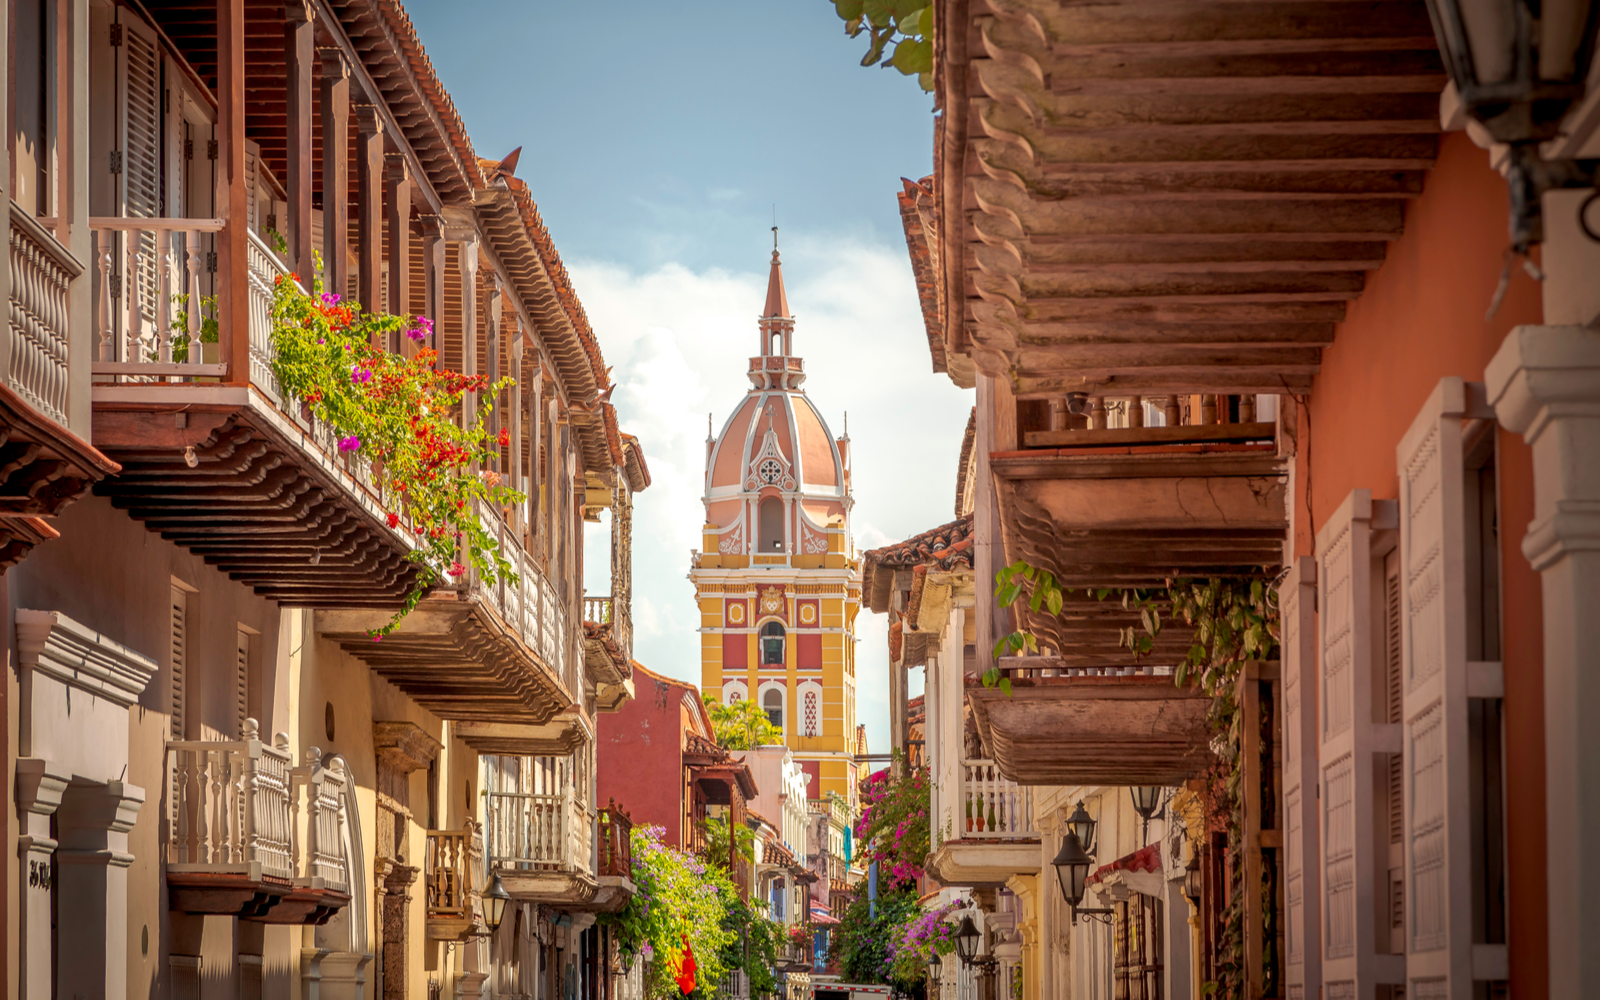 Neat alleyway view of Cartagena de Indias in the walled city during the best time to visit Colombia